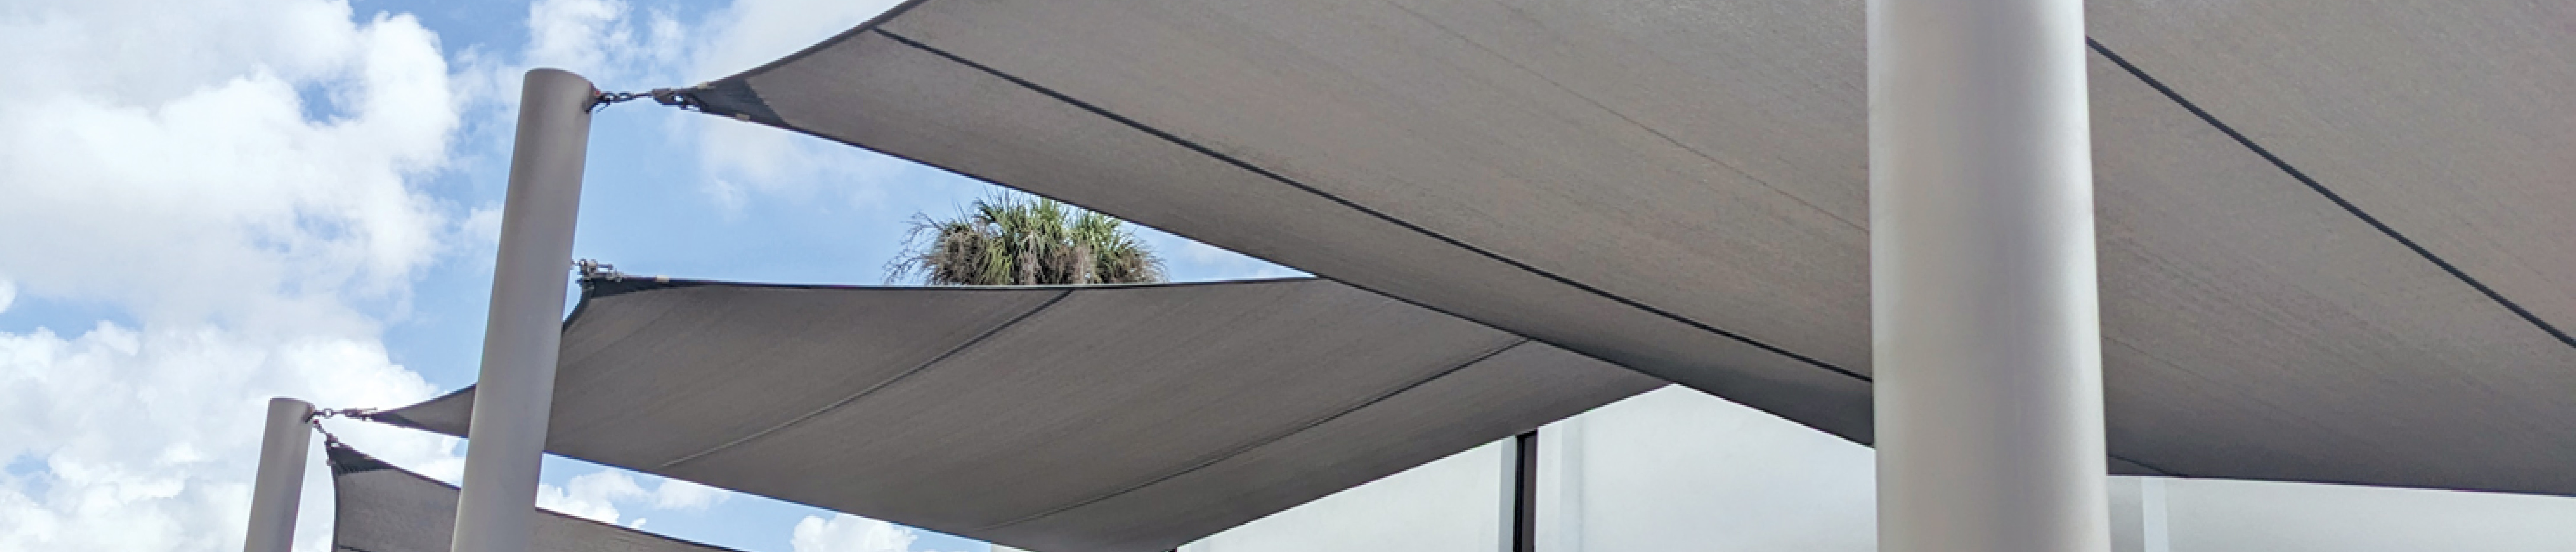 Playground shade sails protect patients – Fabric Architecture Magazine